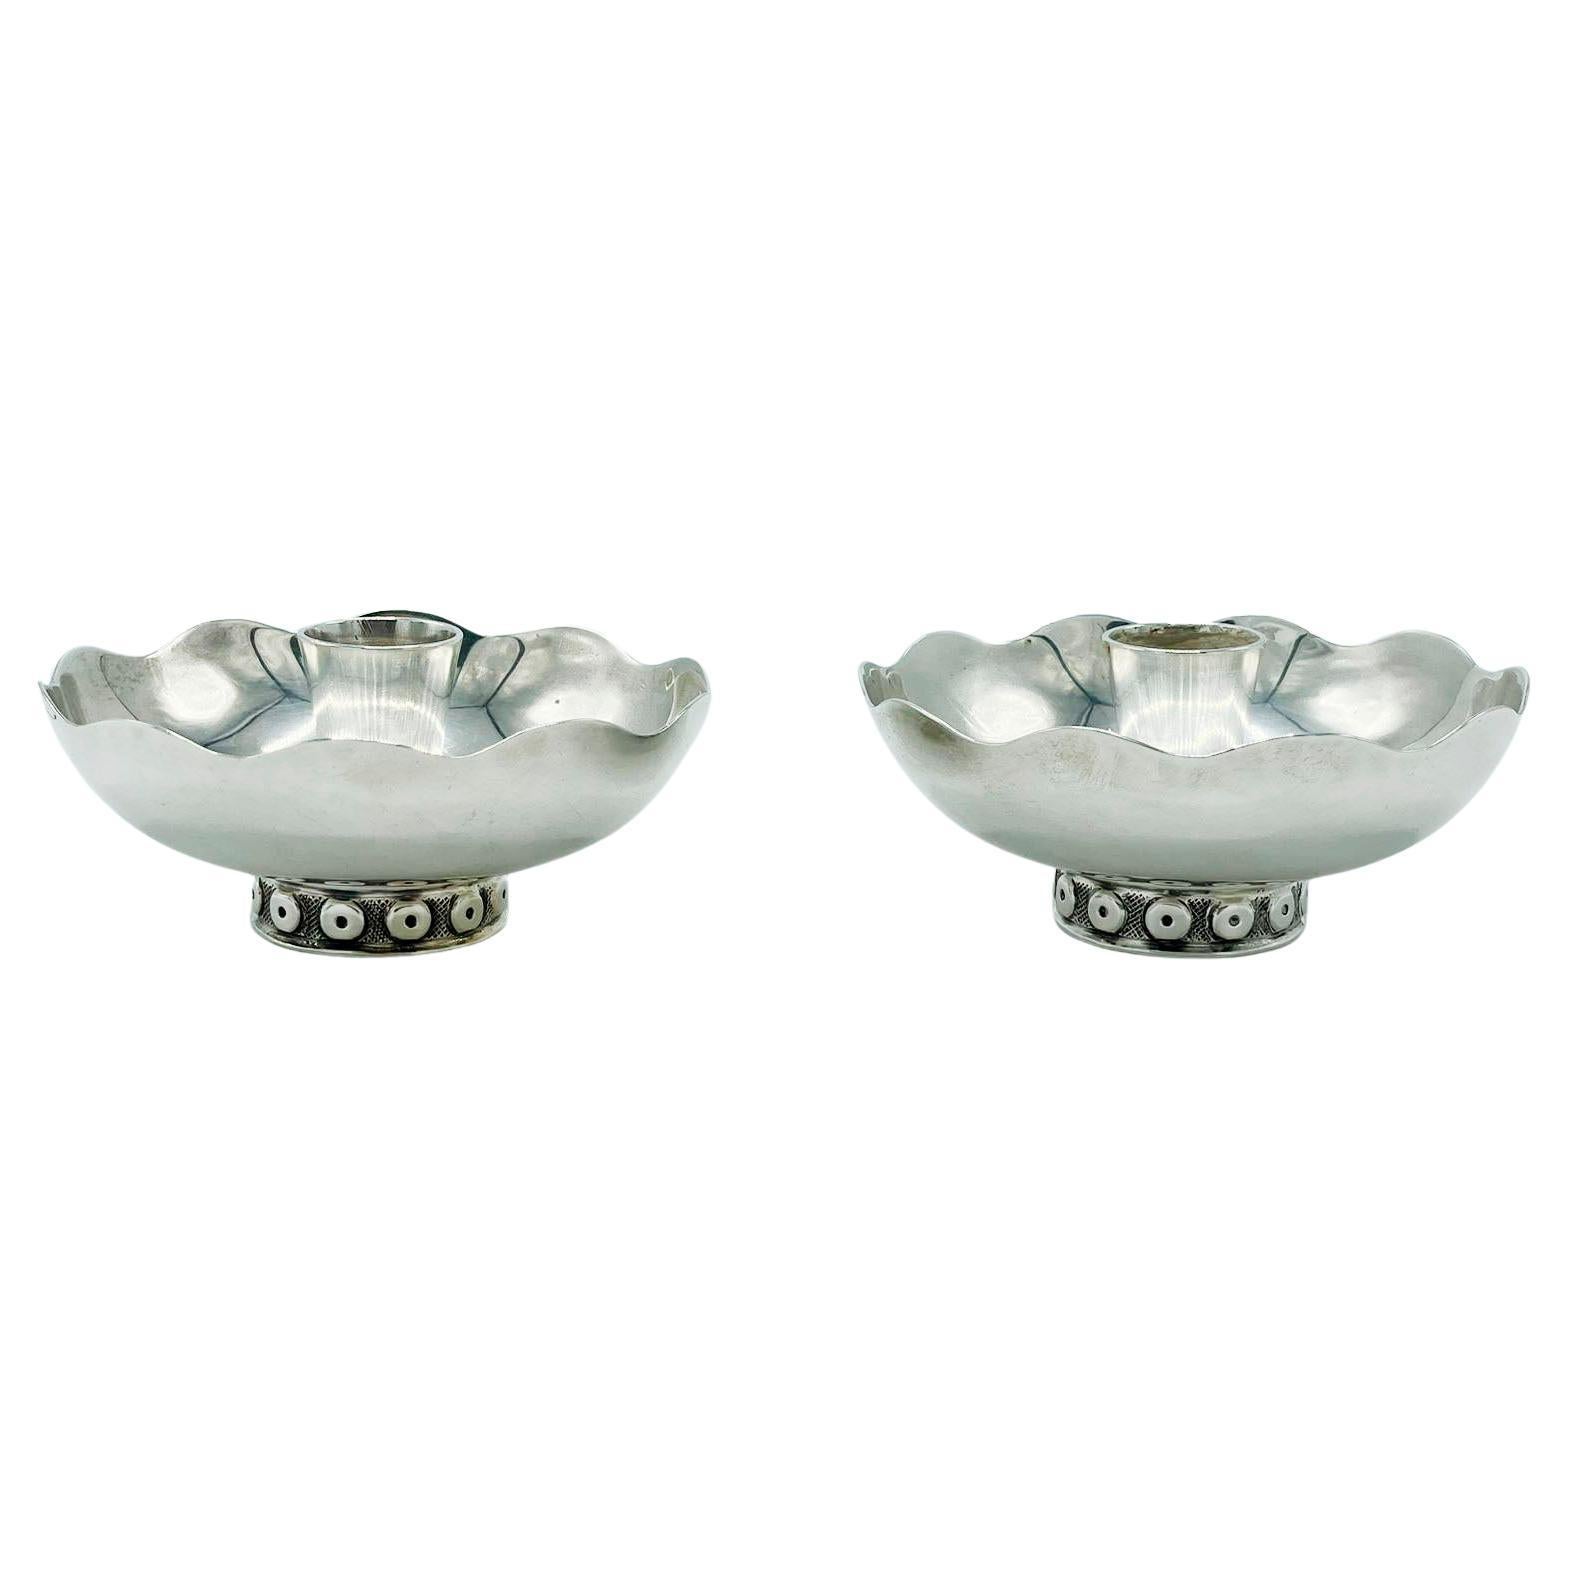 Pair of sterling Silver Pedestal Dish Tray Candle Holder by Tane Orfebres